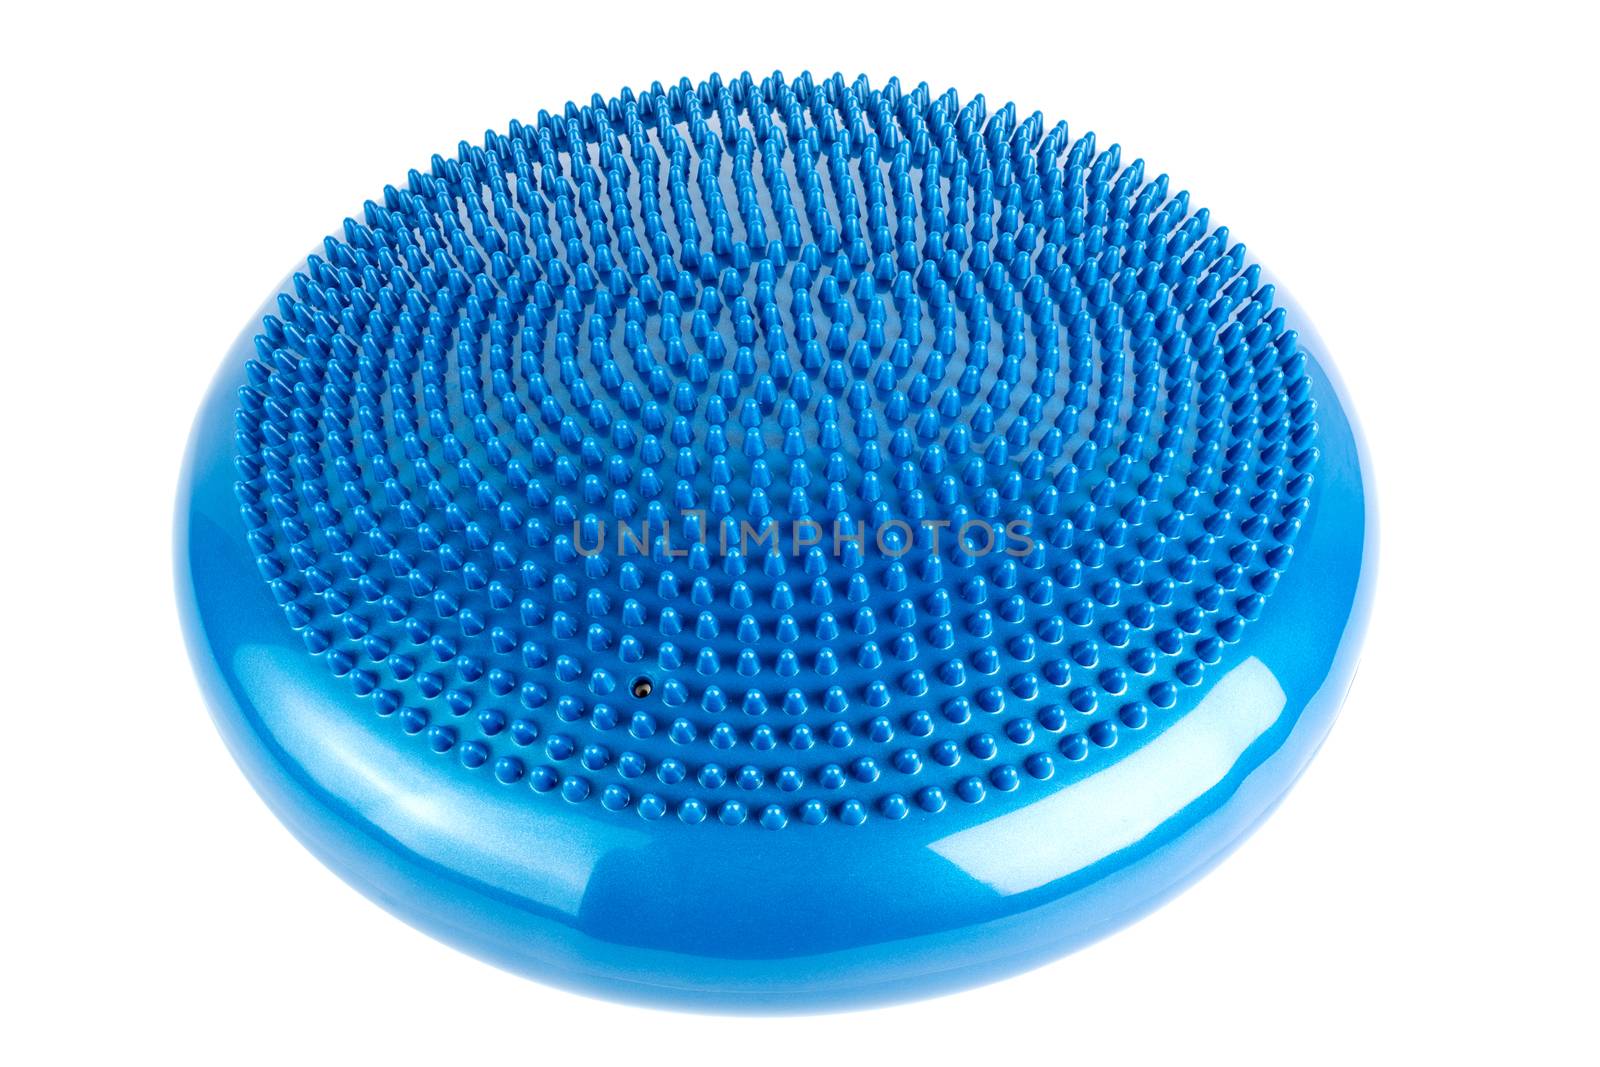 Blue inflatable balance disk isoleated on white background. A balance disk is a cushion can be used in fitness training as the base for core, balance, and stretching exercises. It is also known as a stability disc, wobble disc, and balance cushion.